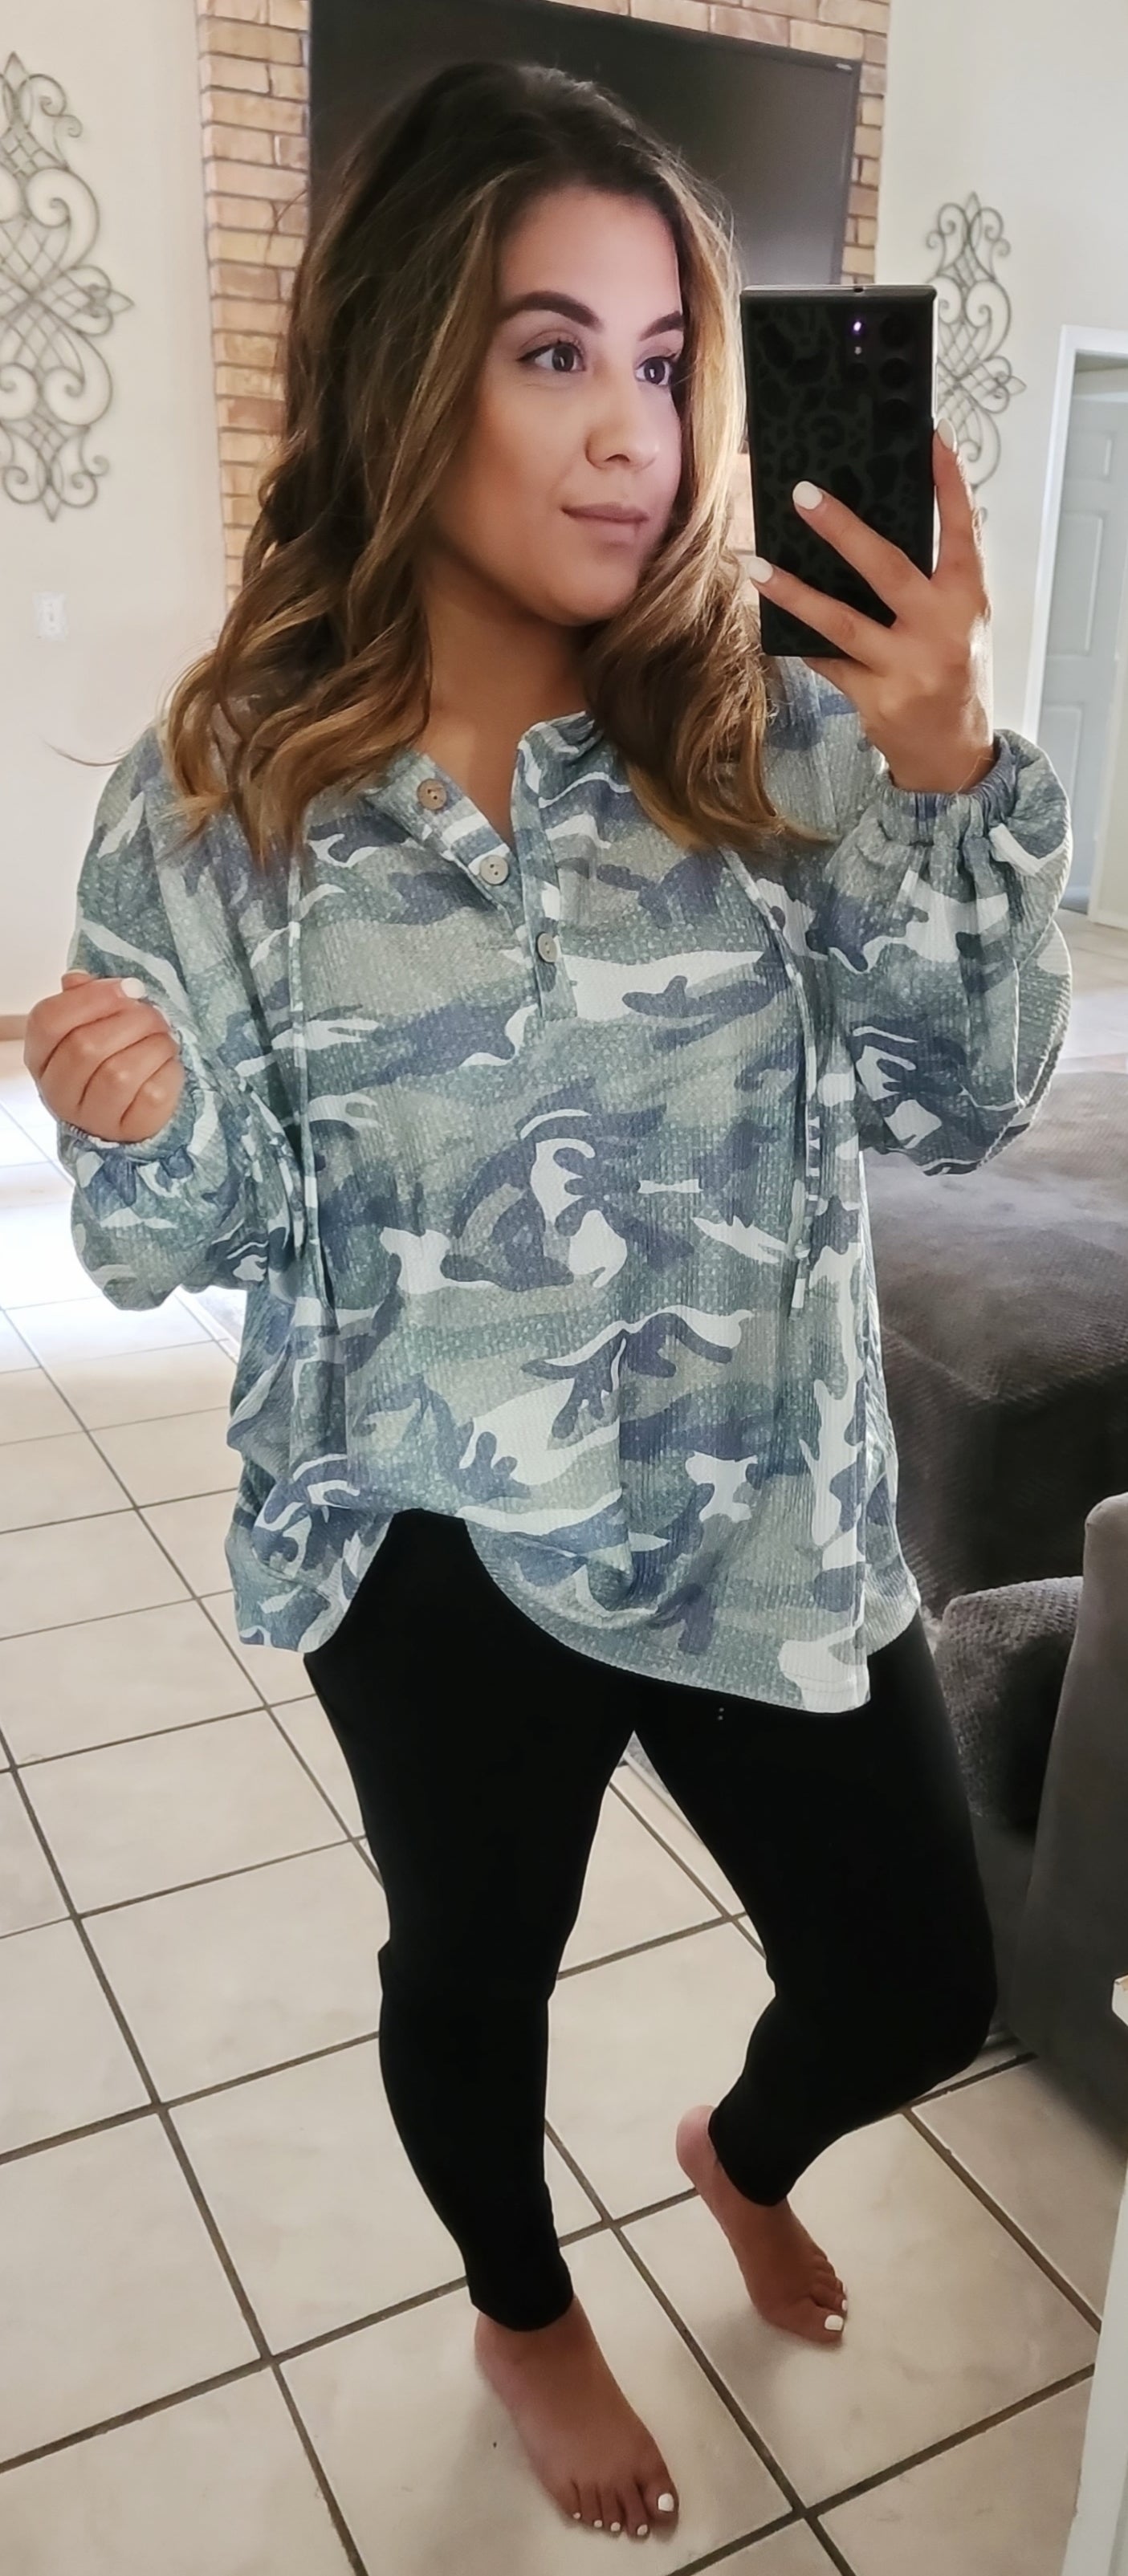 All over Hooded Camo Top